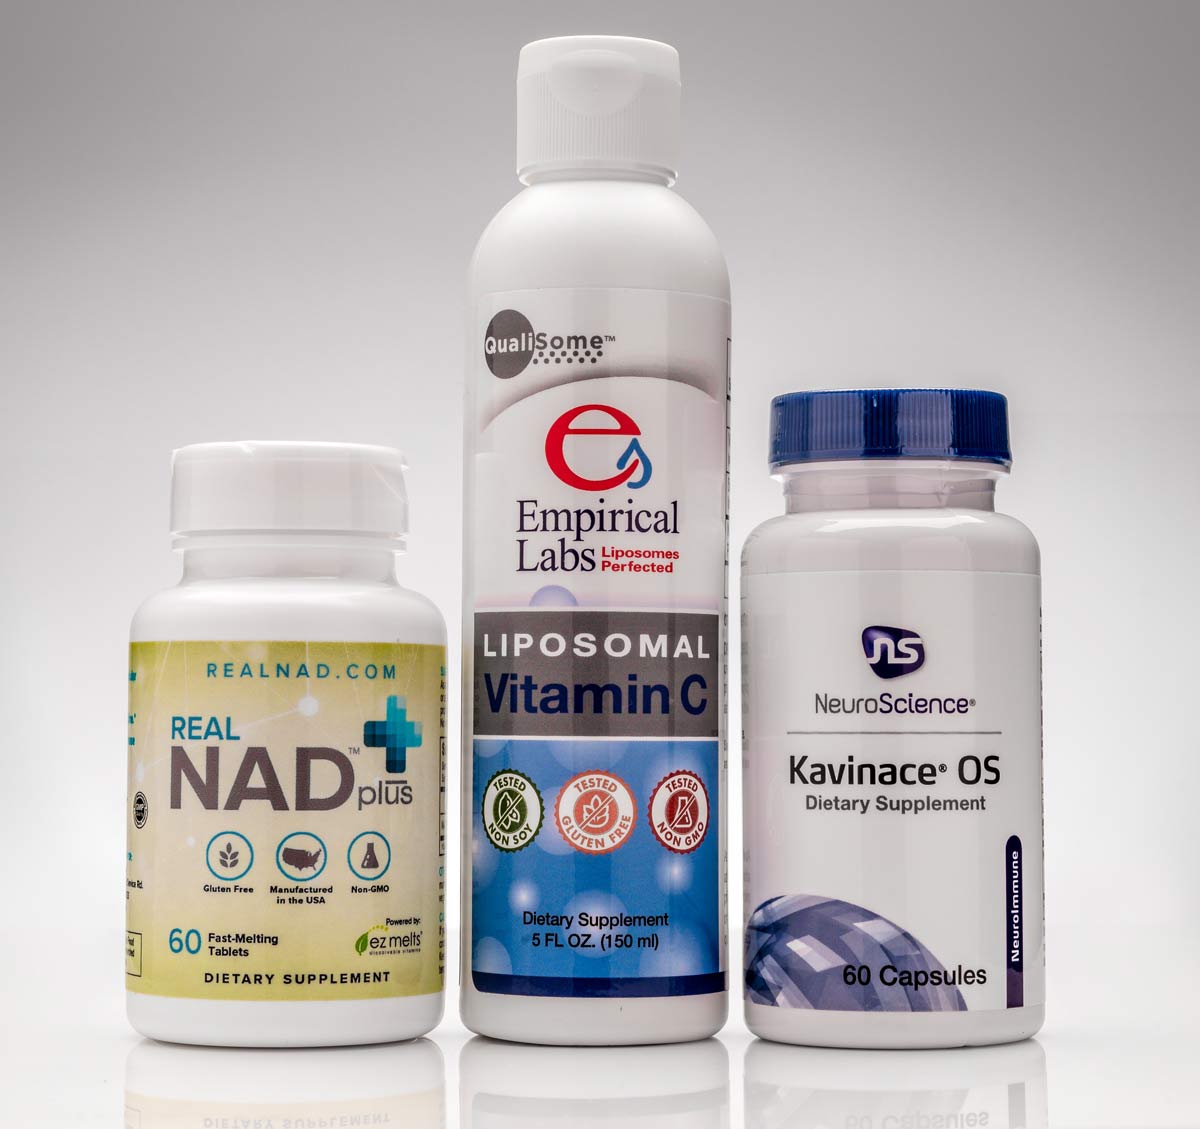 supplement bottles and NAD plus